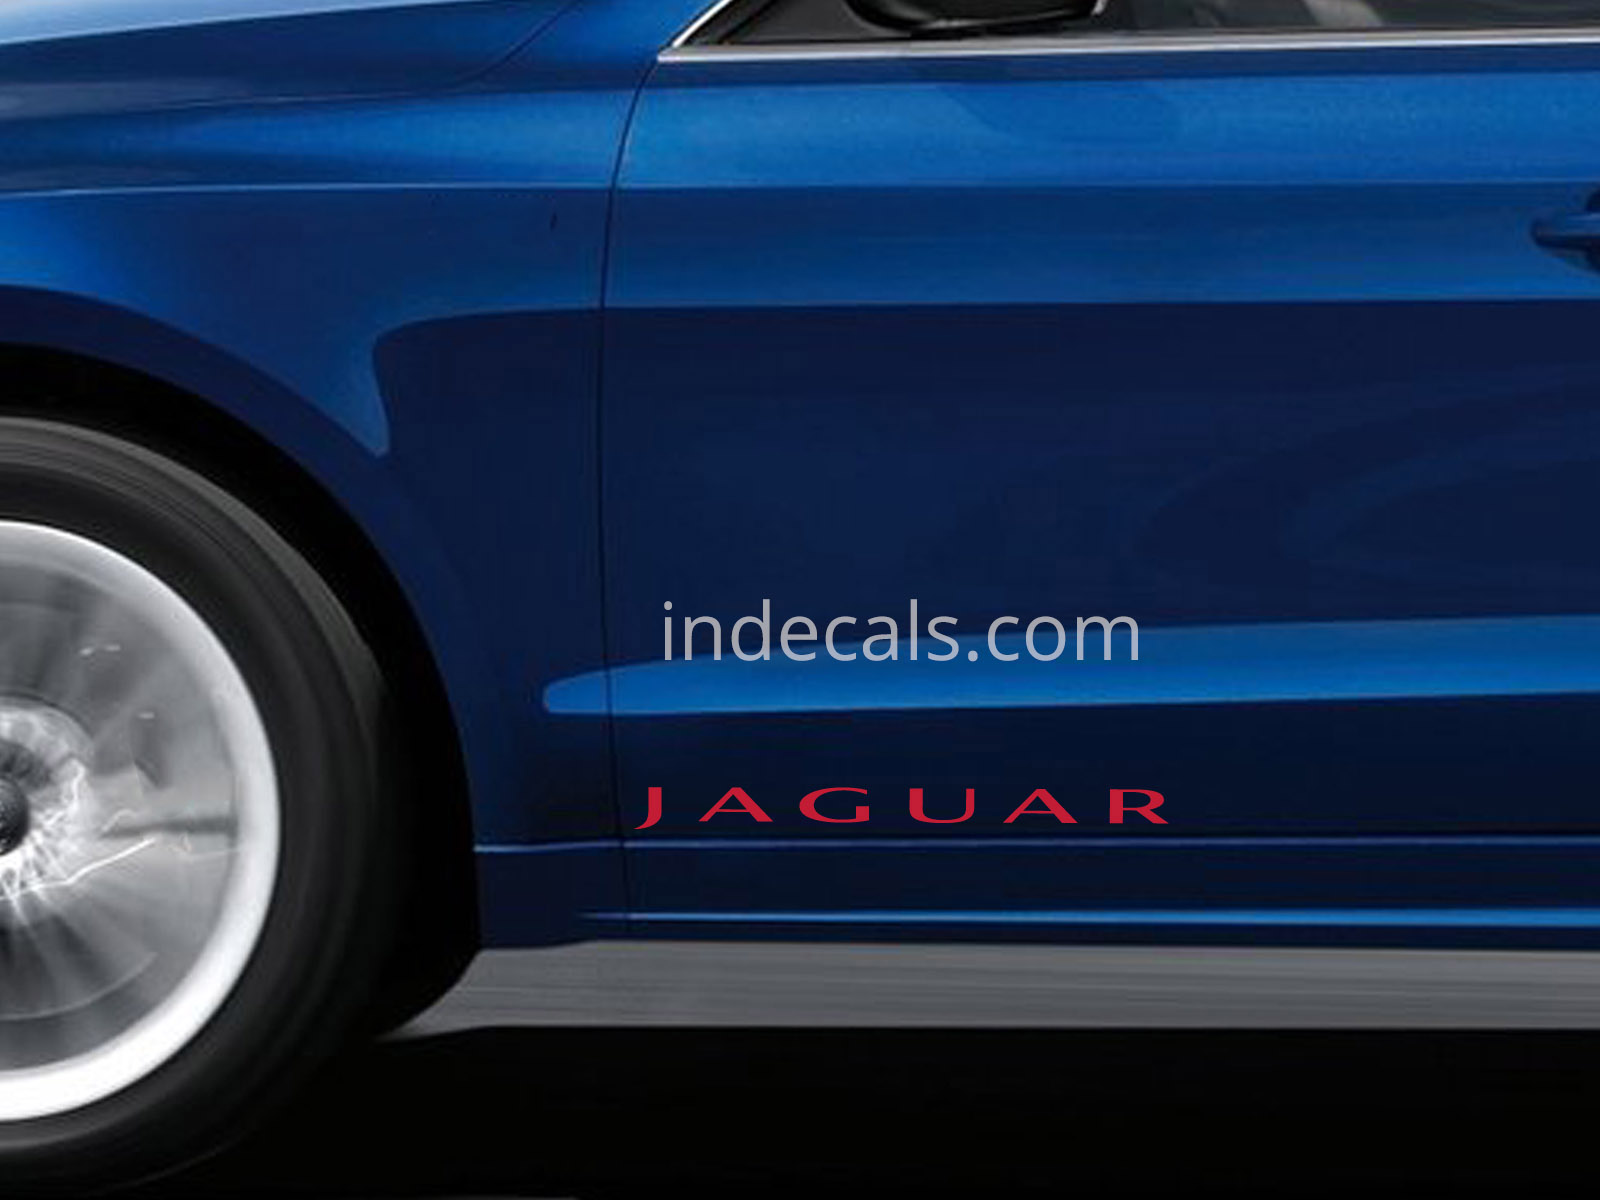 2 x Jaguar Stickers for Doors Large - Red